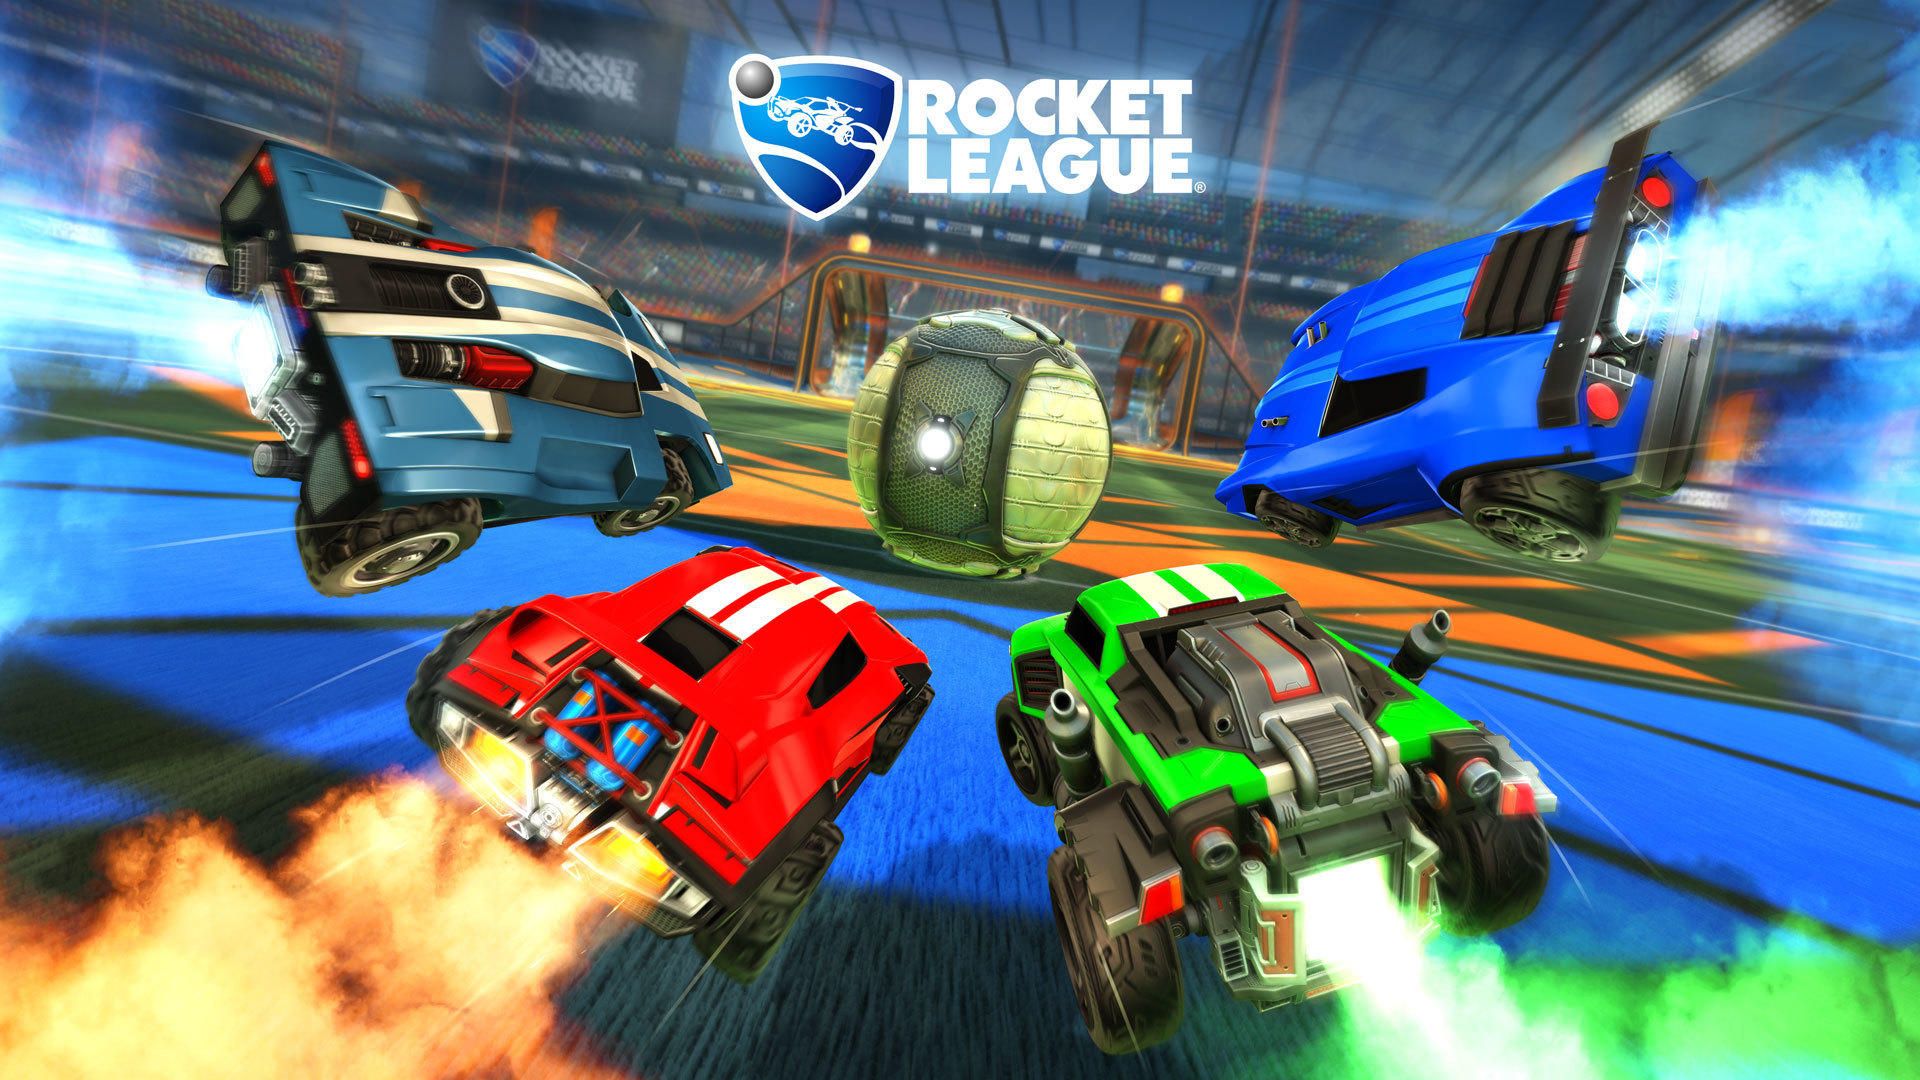 We can all play Rocket League together now